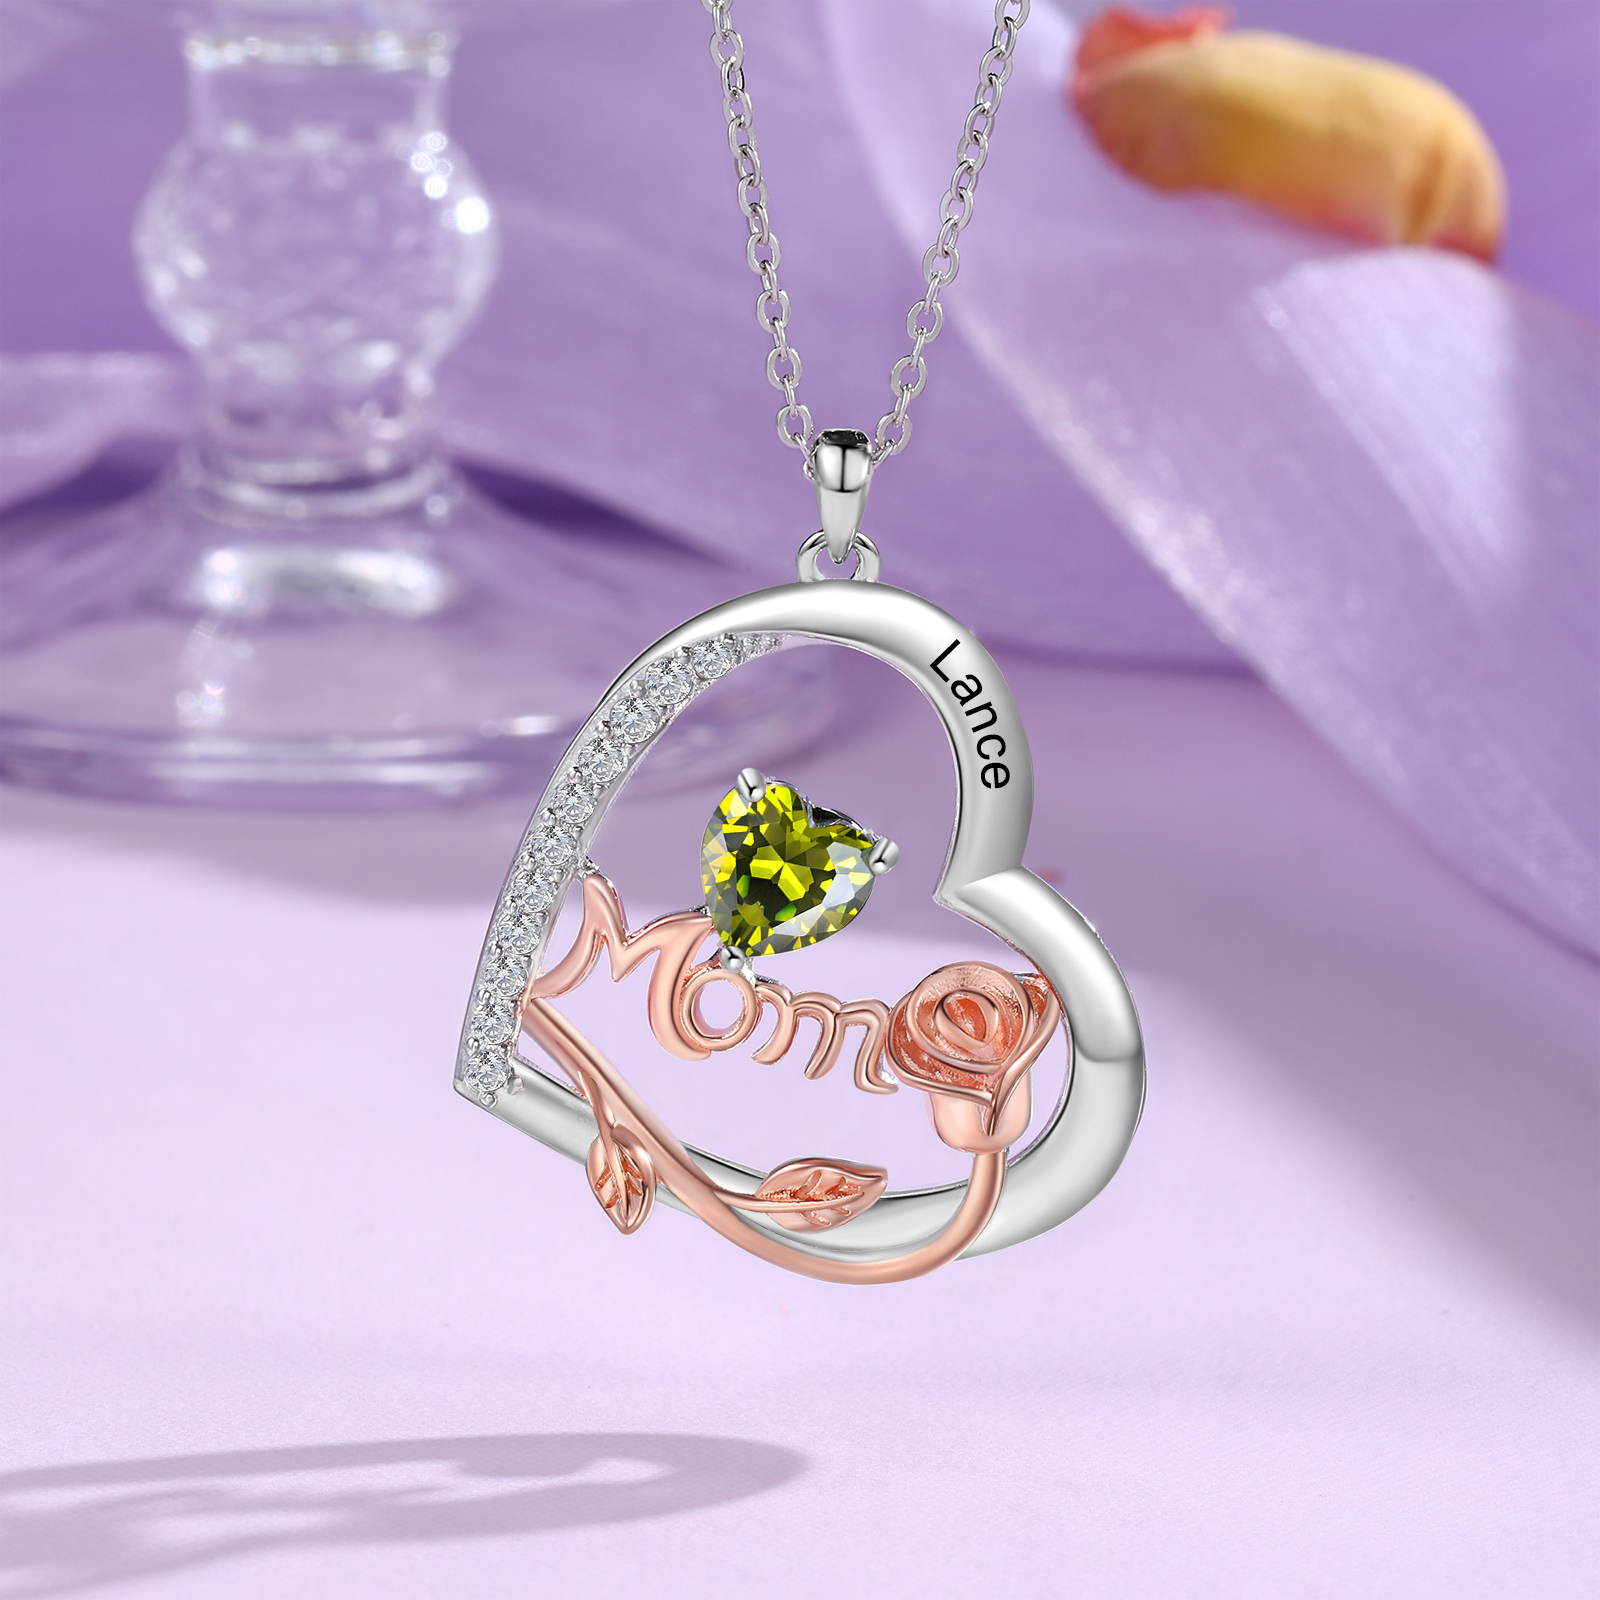 Name - Personalized Silver Heart Necklace with Birthstone and Name as a Mother's Day Gift for Mom